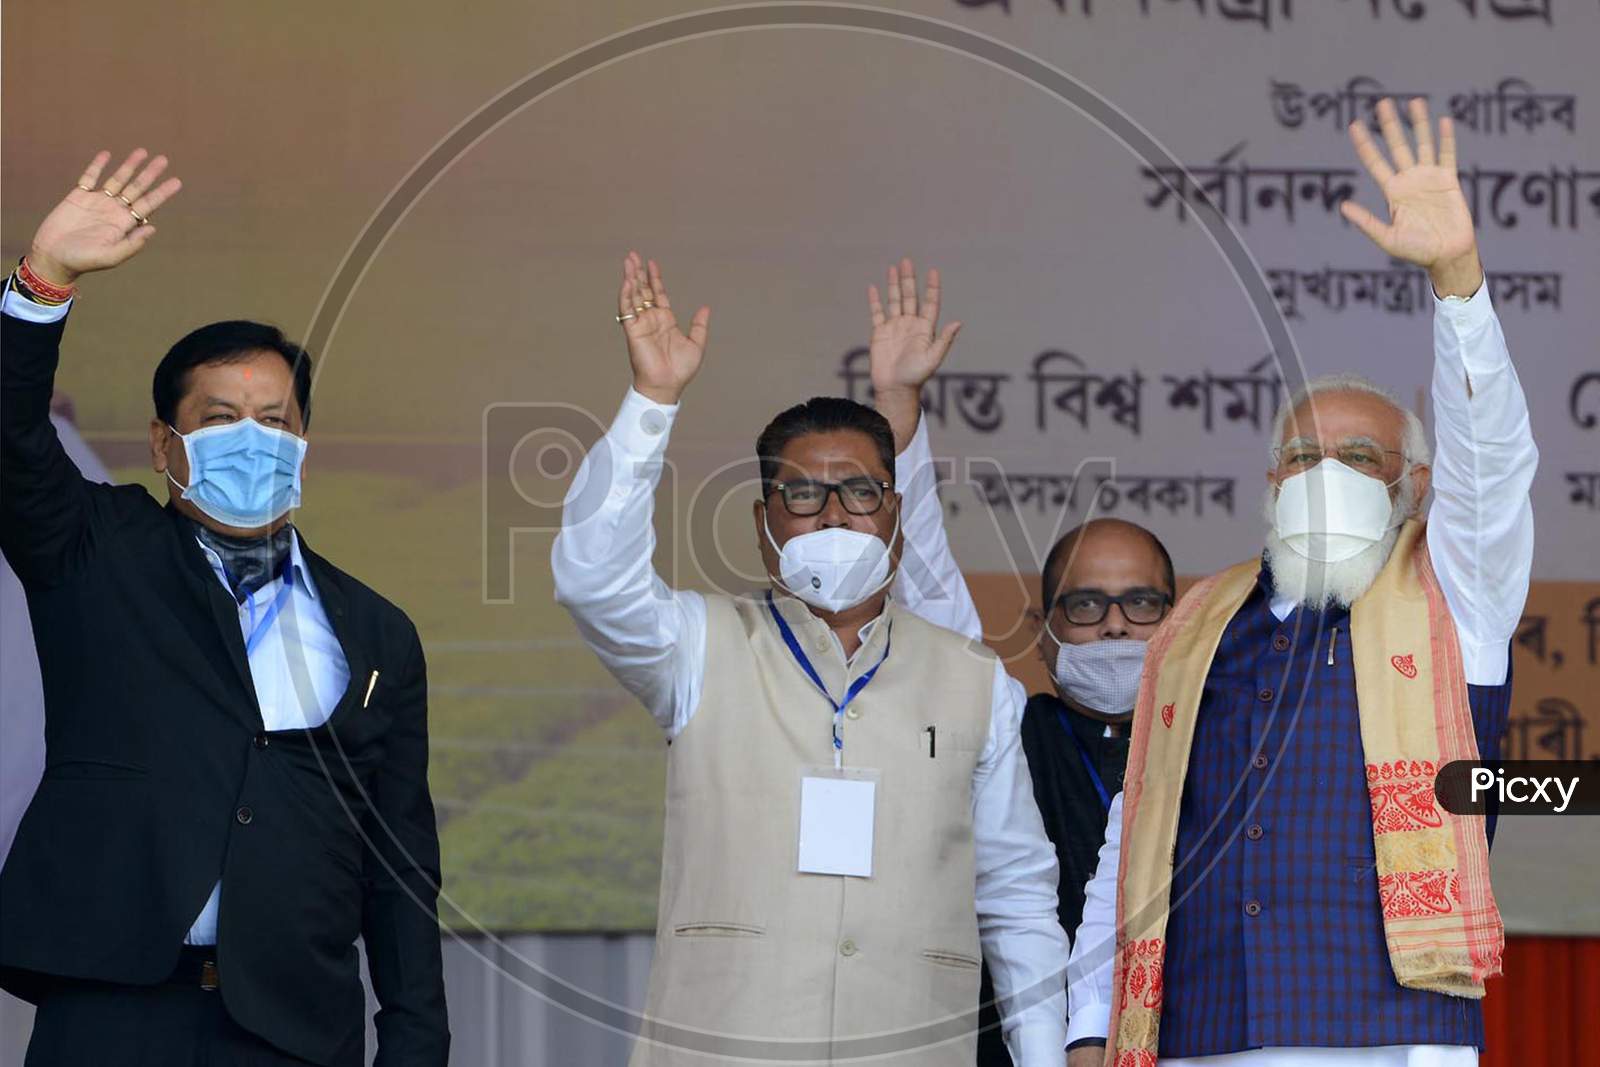 Prime Minister Narendra Modi with Assam CM Sarabananda Sonowal during a public meeting, at Jerenga Pathar in Sivasagar District of Assam, India  on Jan 23,2021